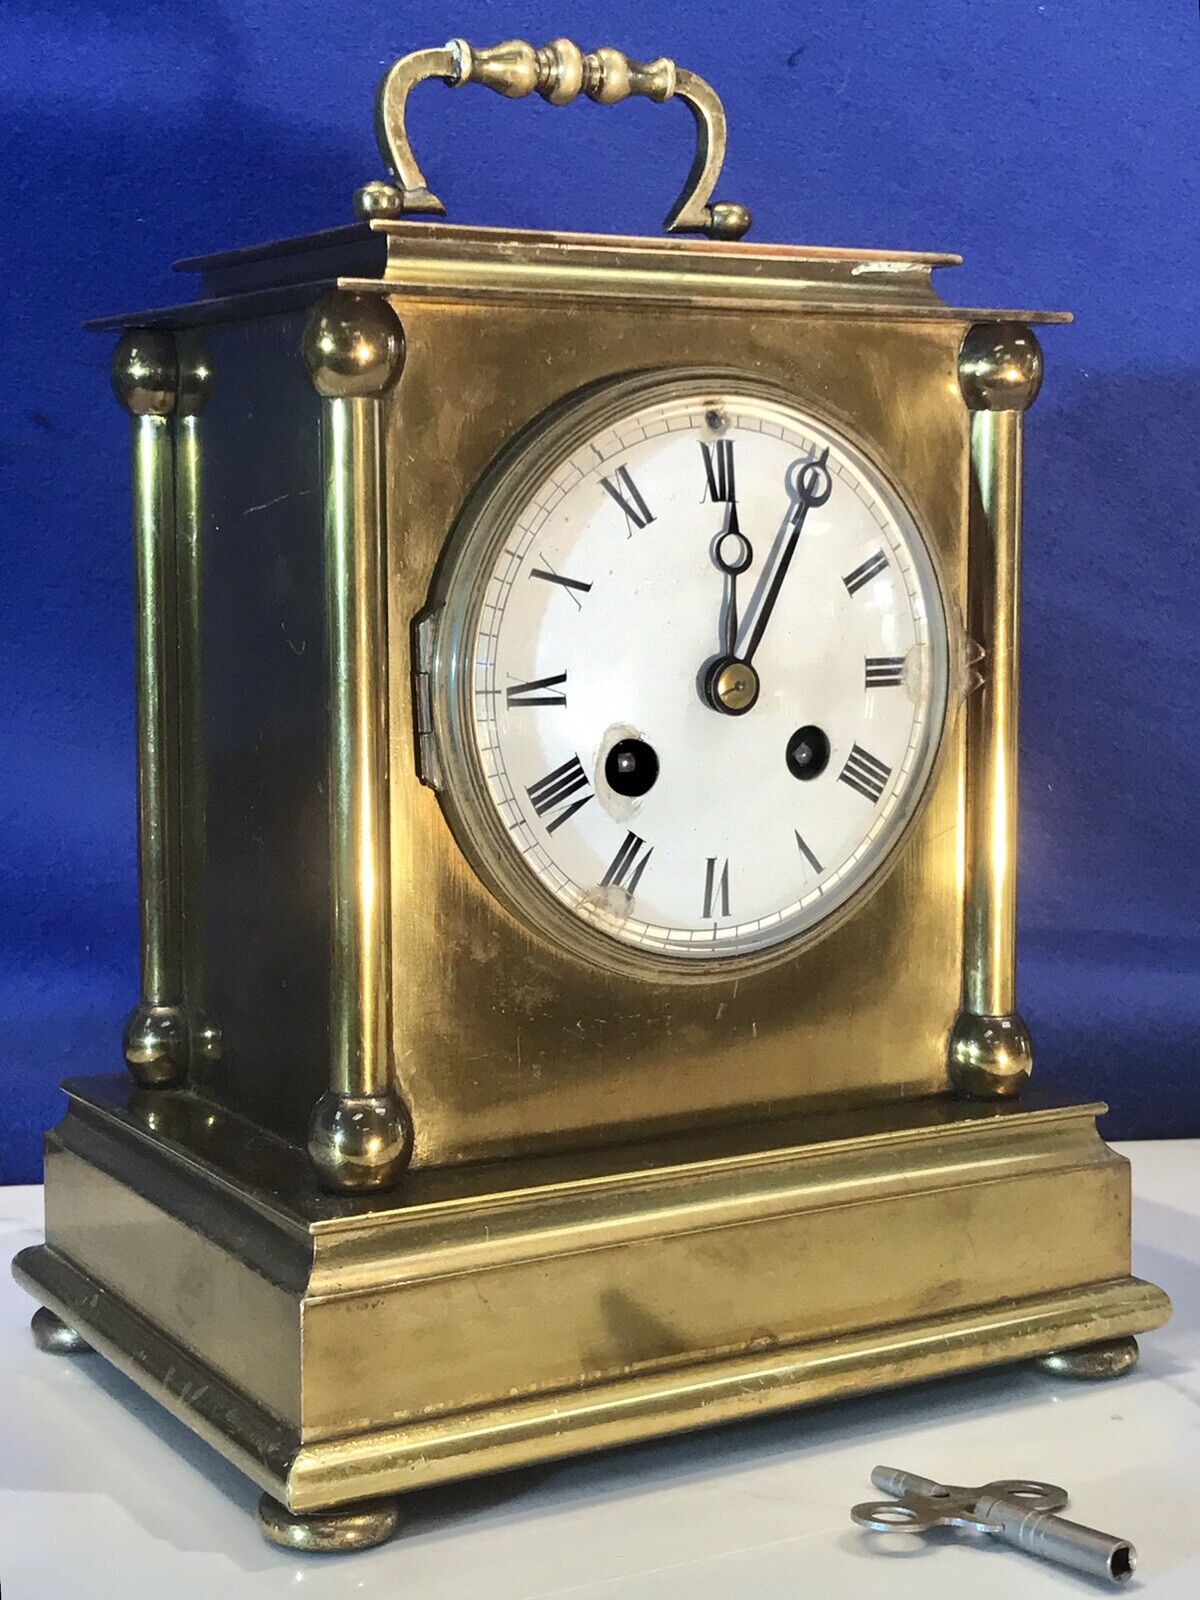 1825 ANTIQUE FRENCH JAPY FRERES STRIKES KEY WOUND,HEAVY GILT BRONZE CLOCK